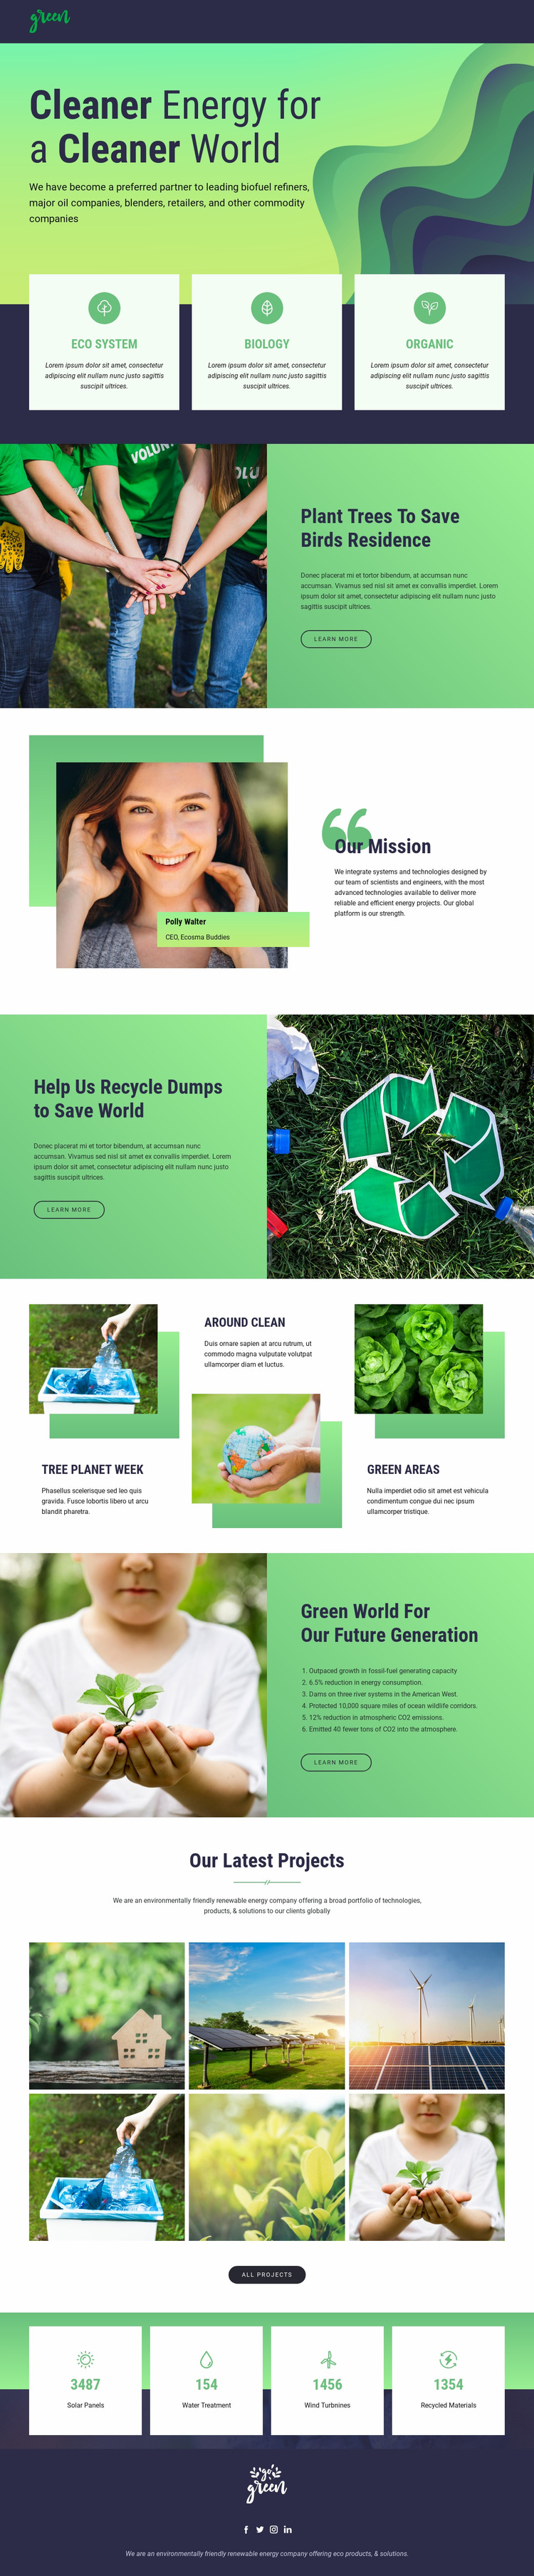 Clean energy to save nature Web Page Design